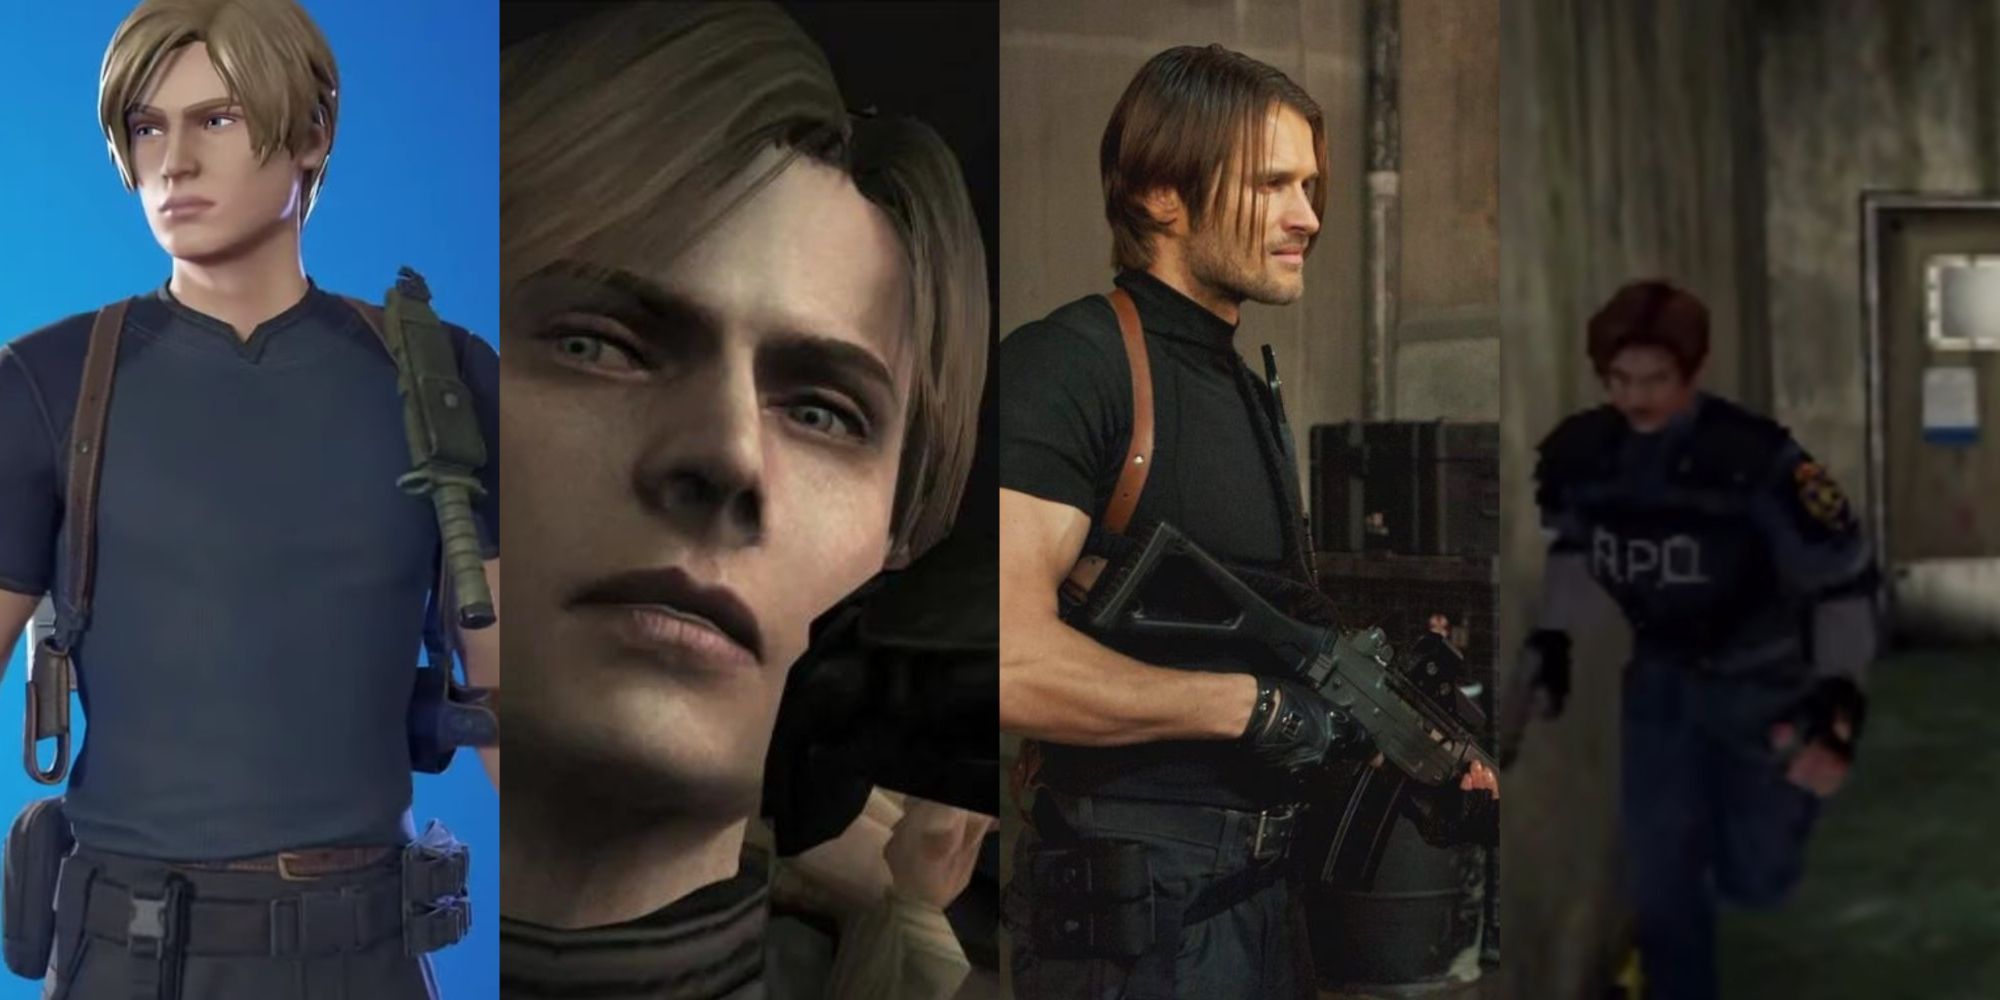 Resident Evil 2 (Video Game 1998) Face Models and Voice Actors